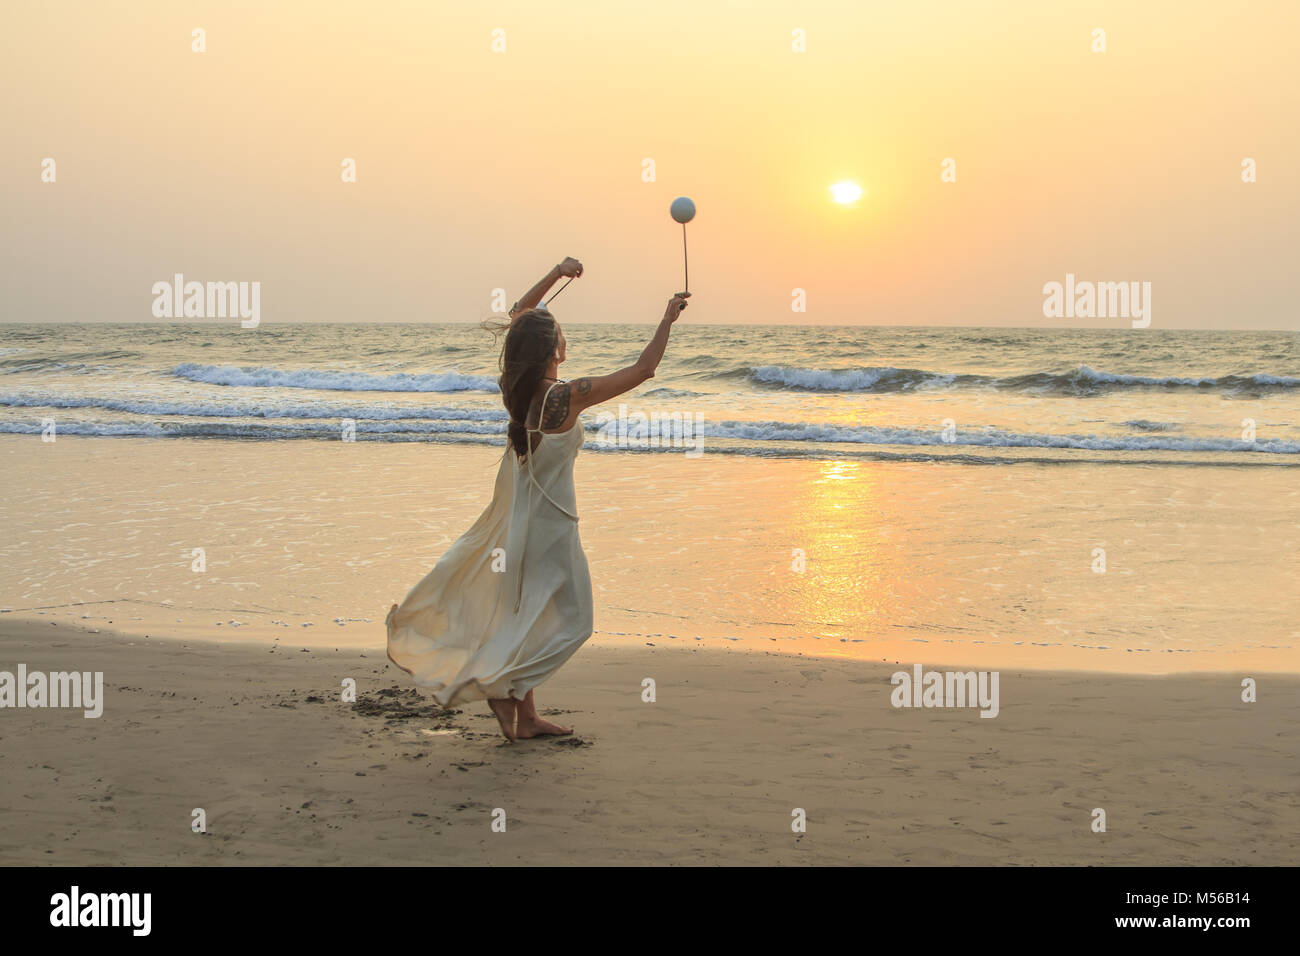 Unidentified woman spinning poi on the beach. Stock Photo